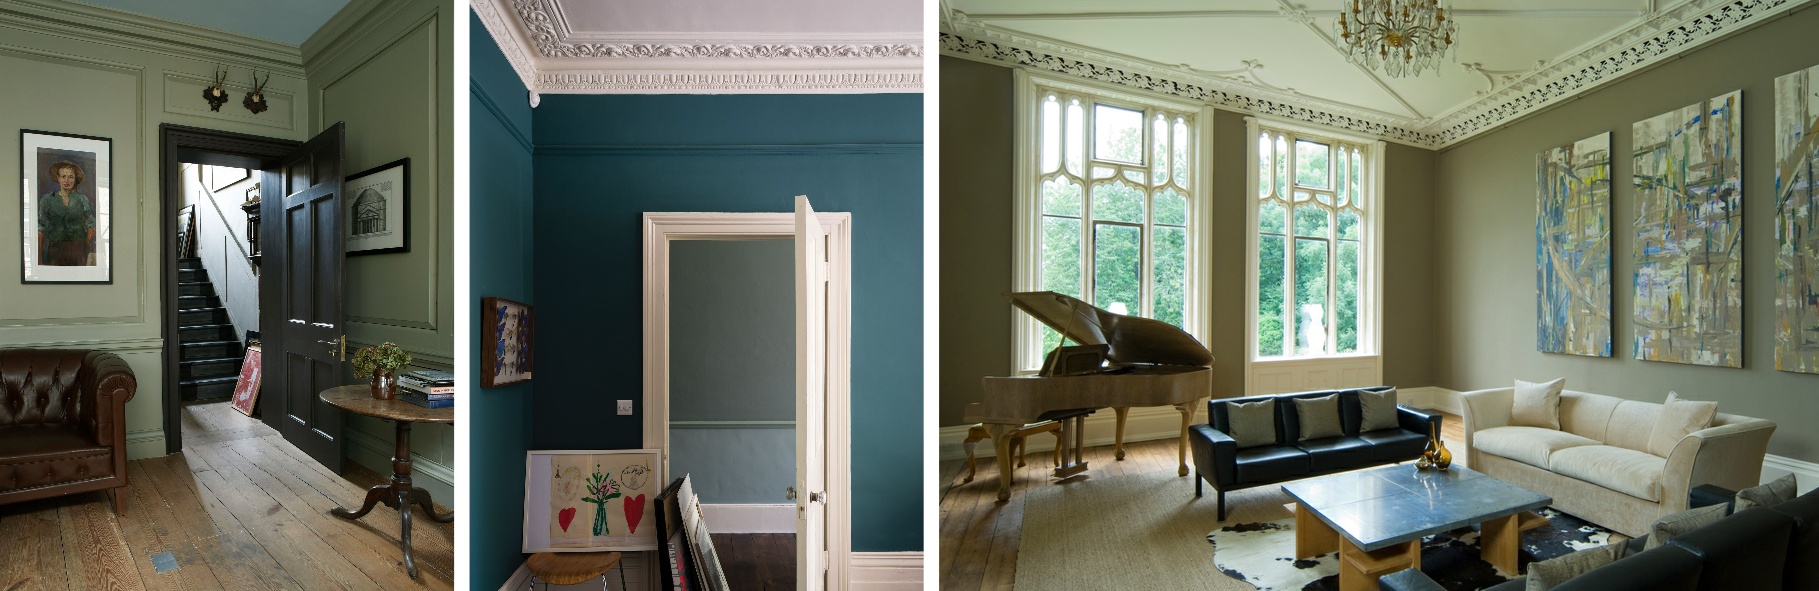 Farrow and Ball painted Architectural Rooms showing decorative cornice and plaster mouldings.